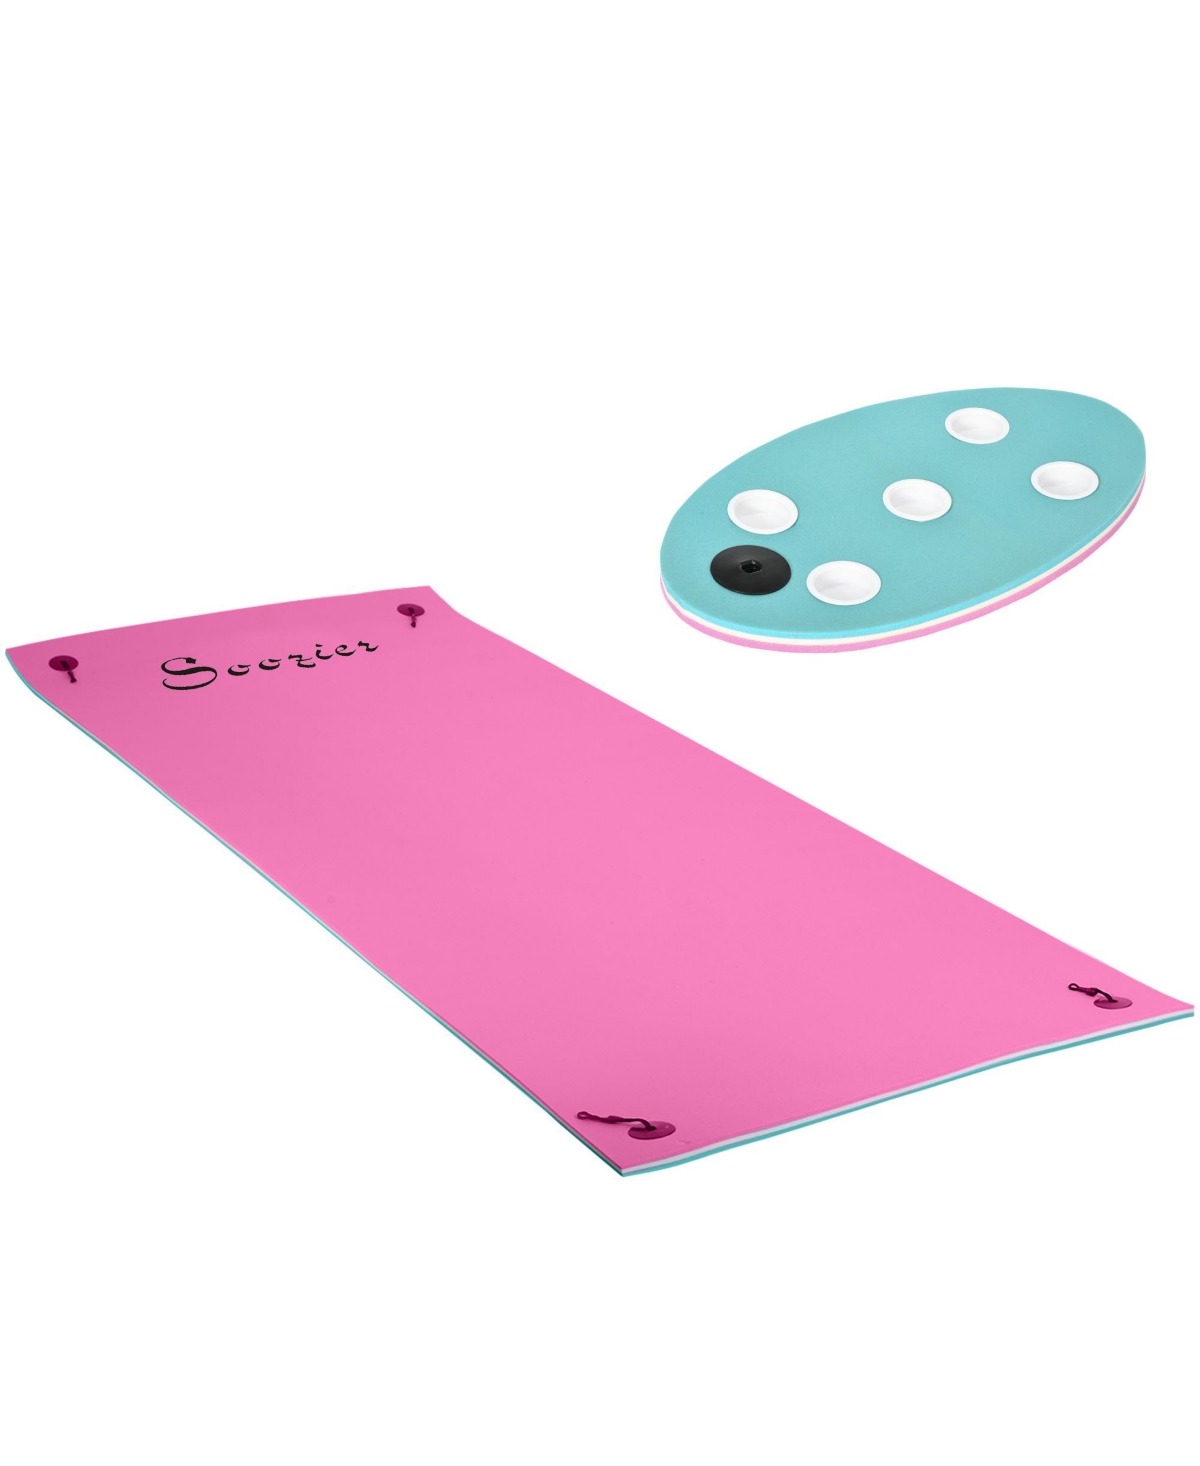 12.5' x 5' Floating Mat with Drink Holders 3-Layer Lily Pad, Pink - Pink